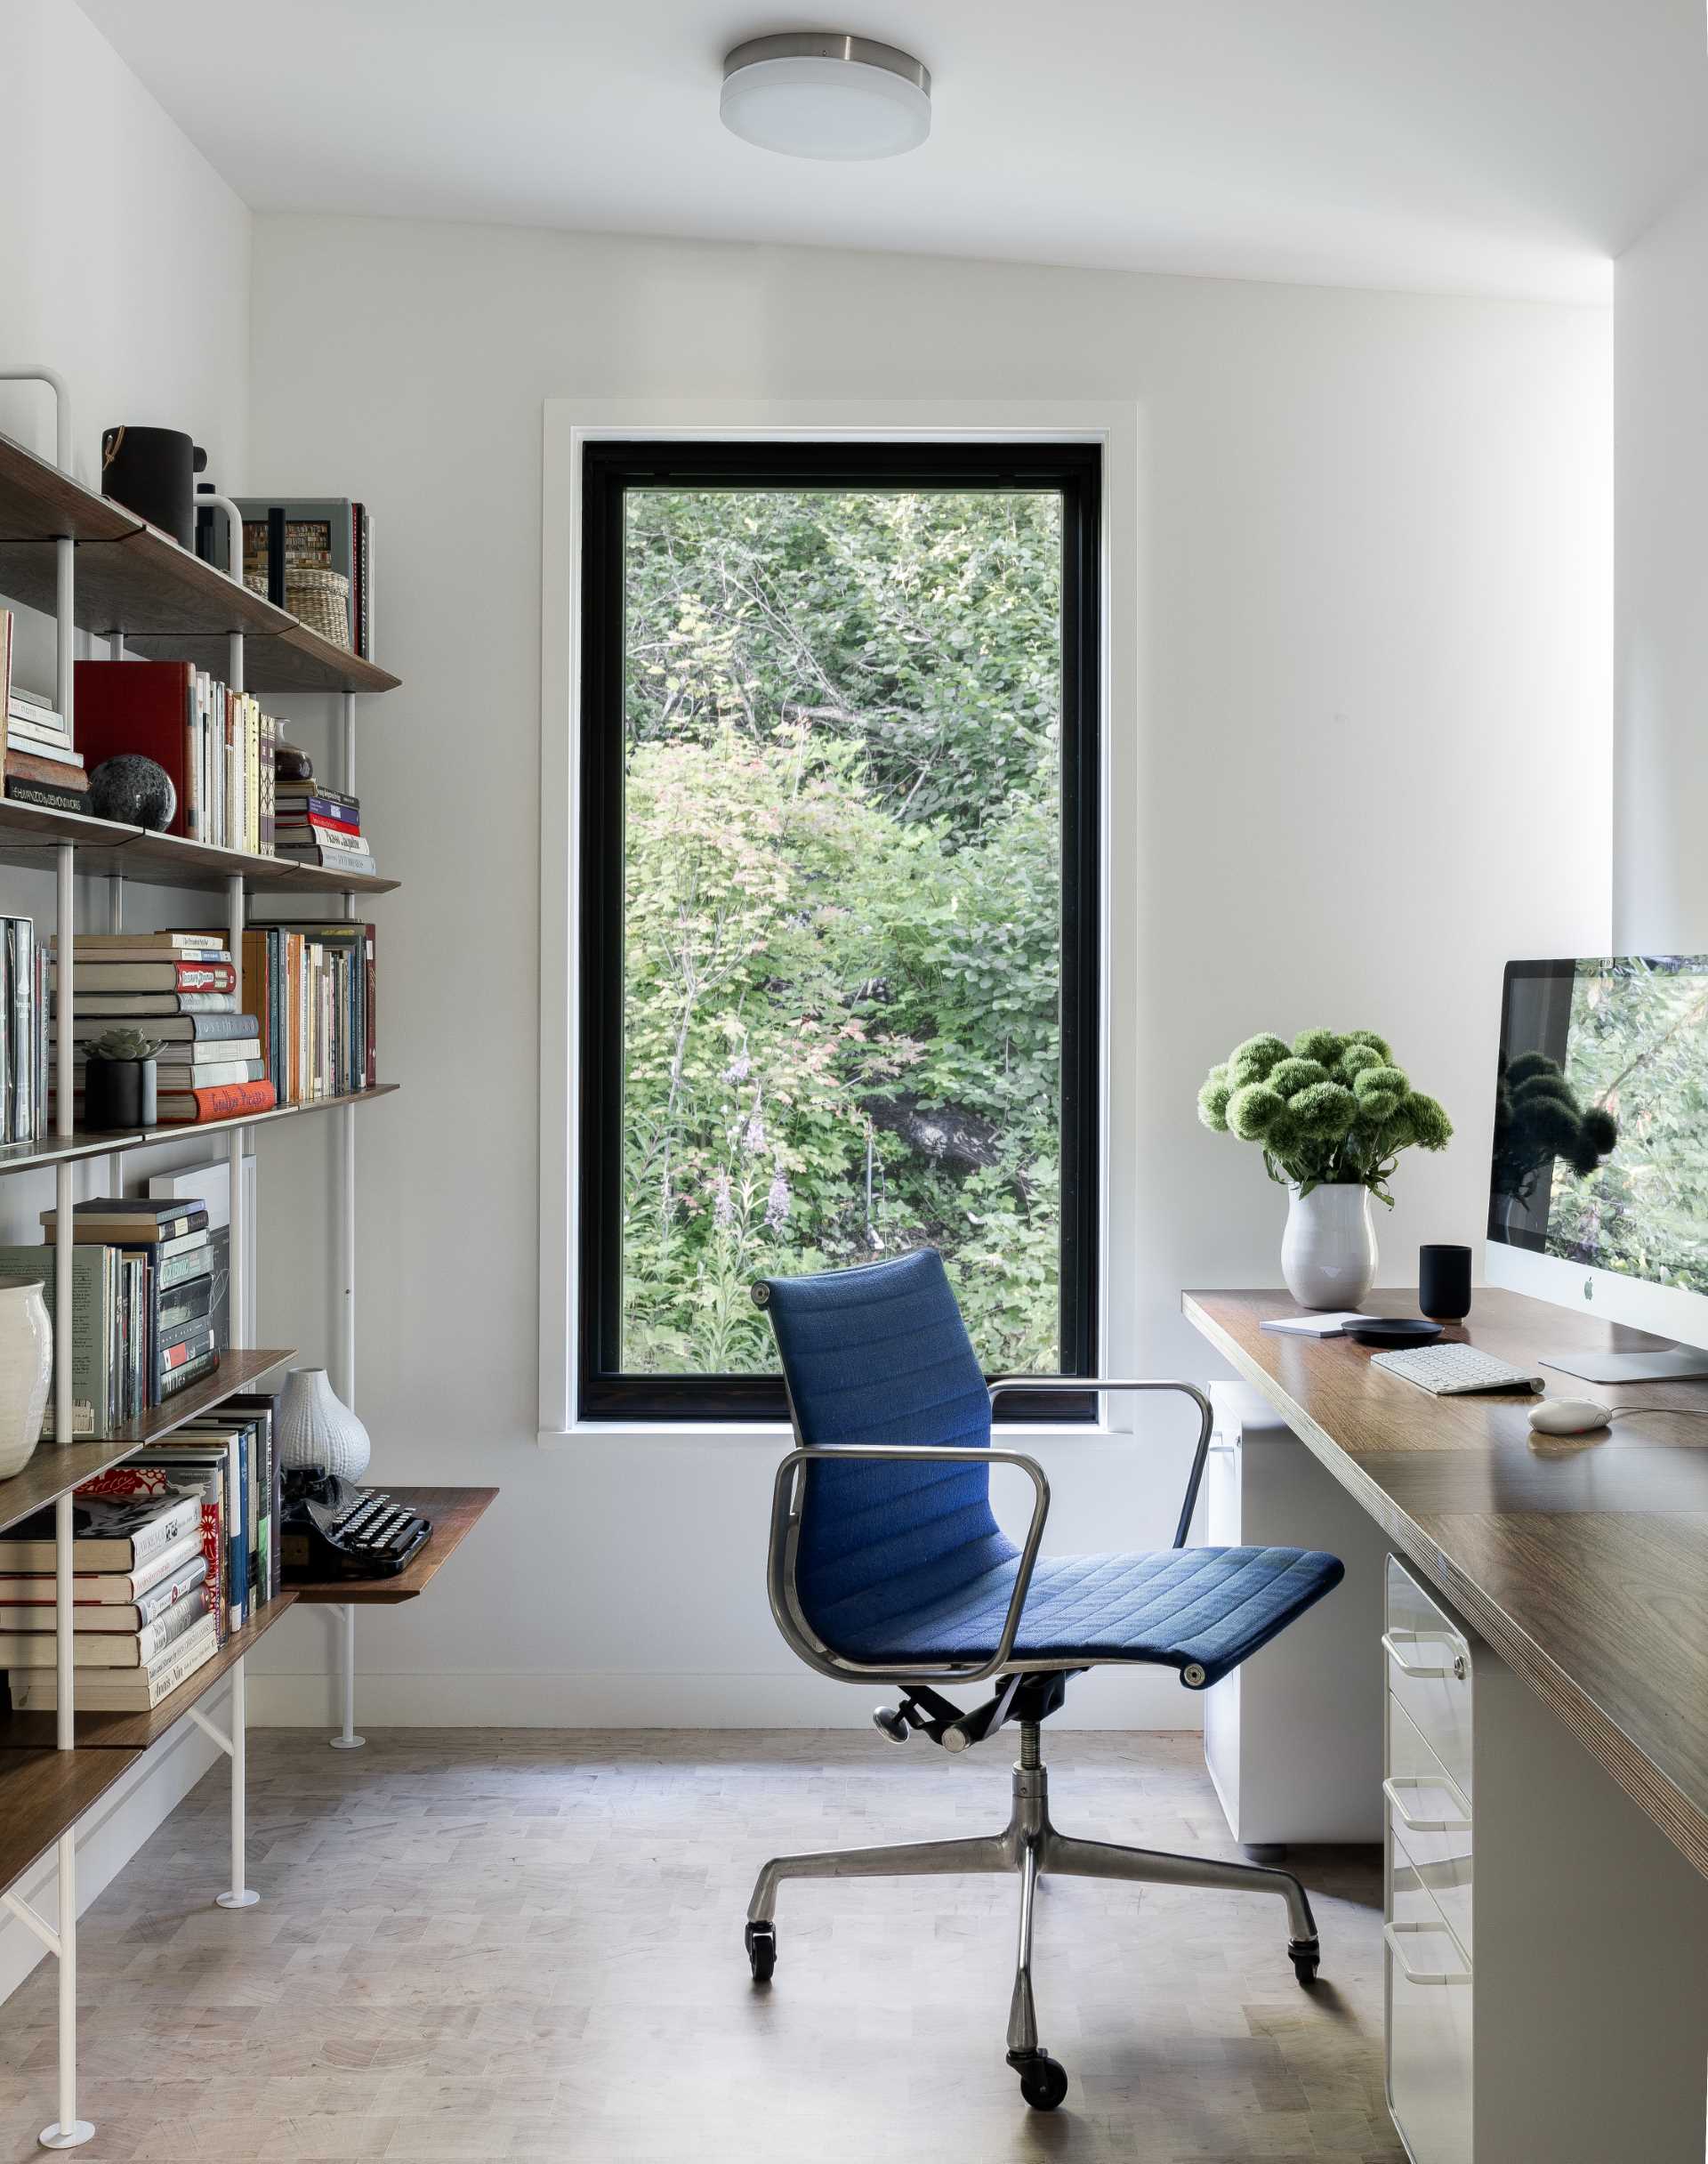 A home office furnished with a shelving unit and a desk, enjoys natural light from the vertical window.